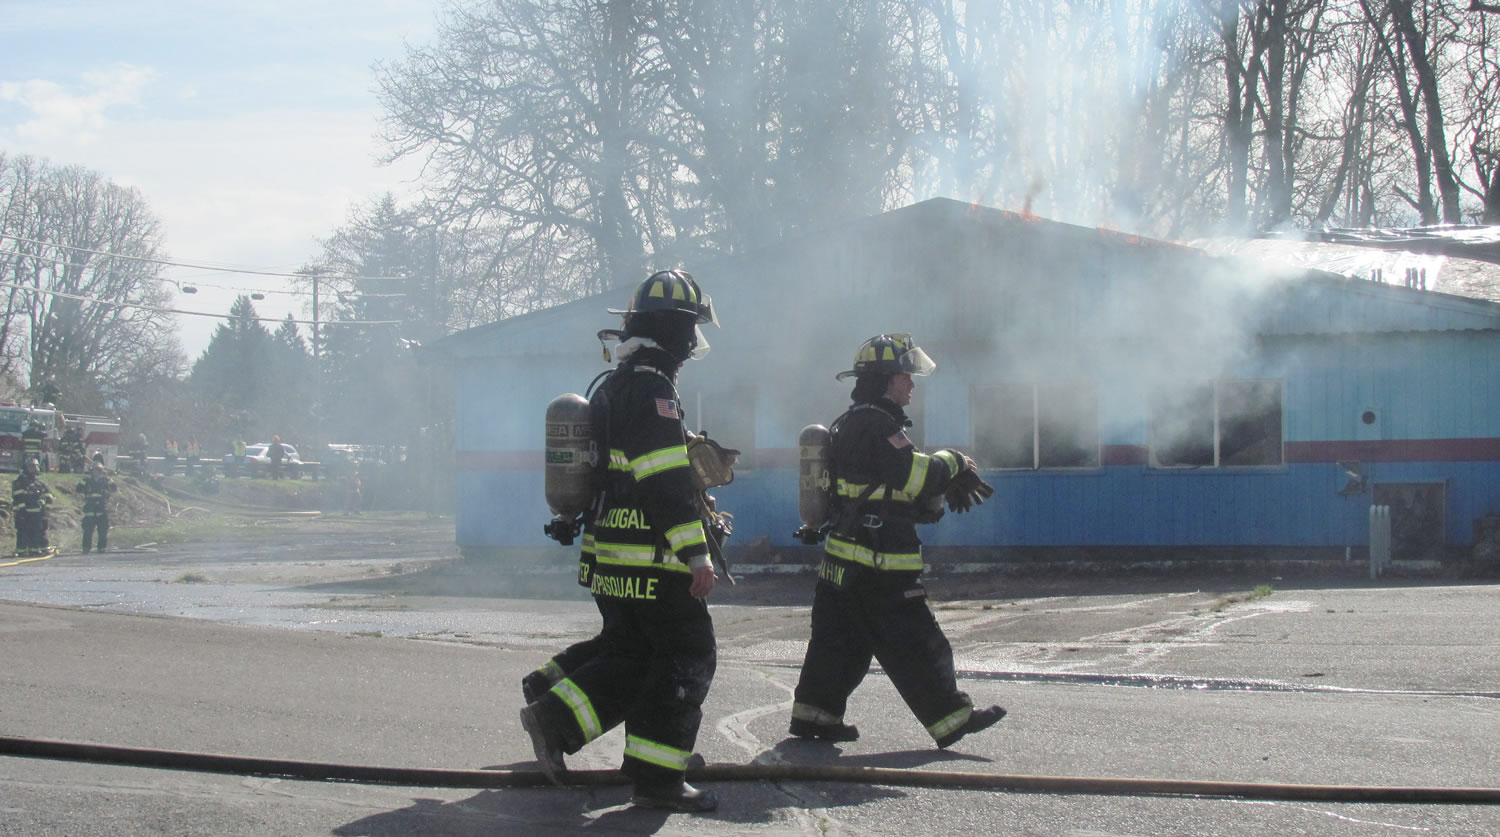 Firefighters make final preparations for the controlled burn of the former Riverside Bowl building in Camas along Northeast Third Avenue. The facility was originally built in 1947, and when it was destroyed on Saturday it was one of the largest practice burns in Camas history with smoke visible from several miles away. Personnel from the Camas and Washougal fire departments and  East County Fire and Rescue participated in the training exercise.